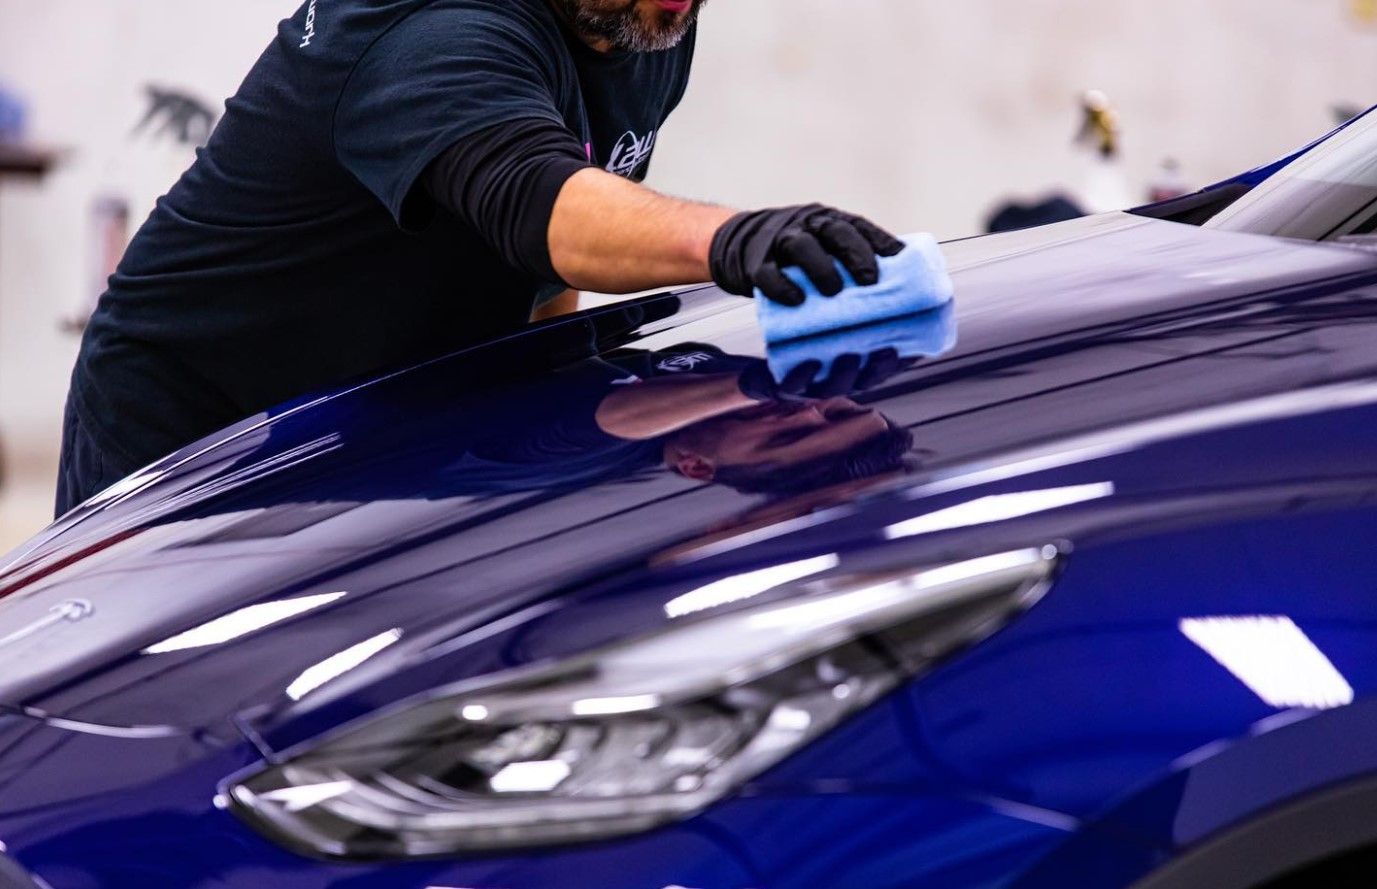 A man is cleaning the hood of a blue car with a cloth.